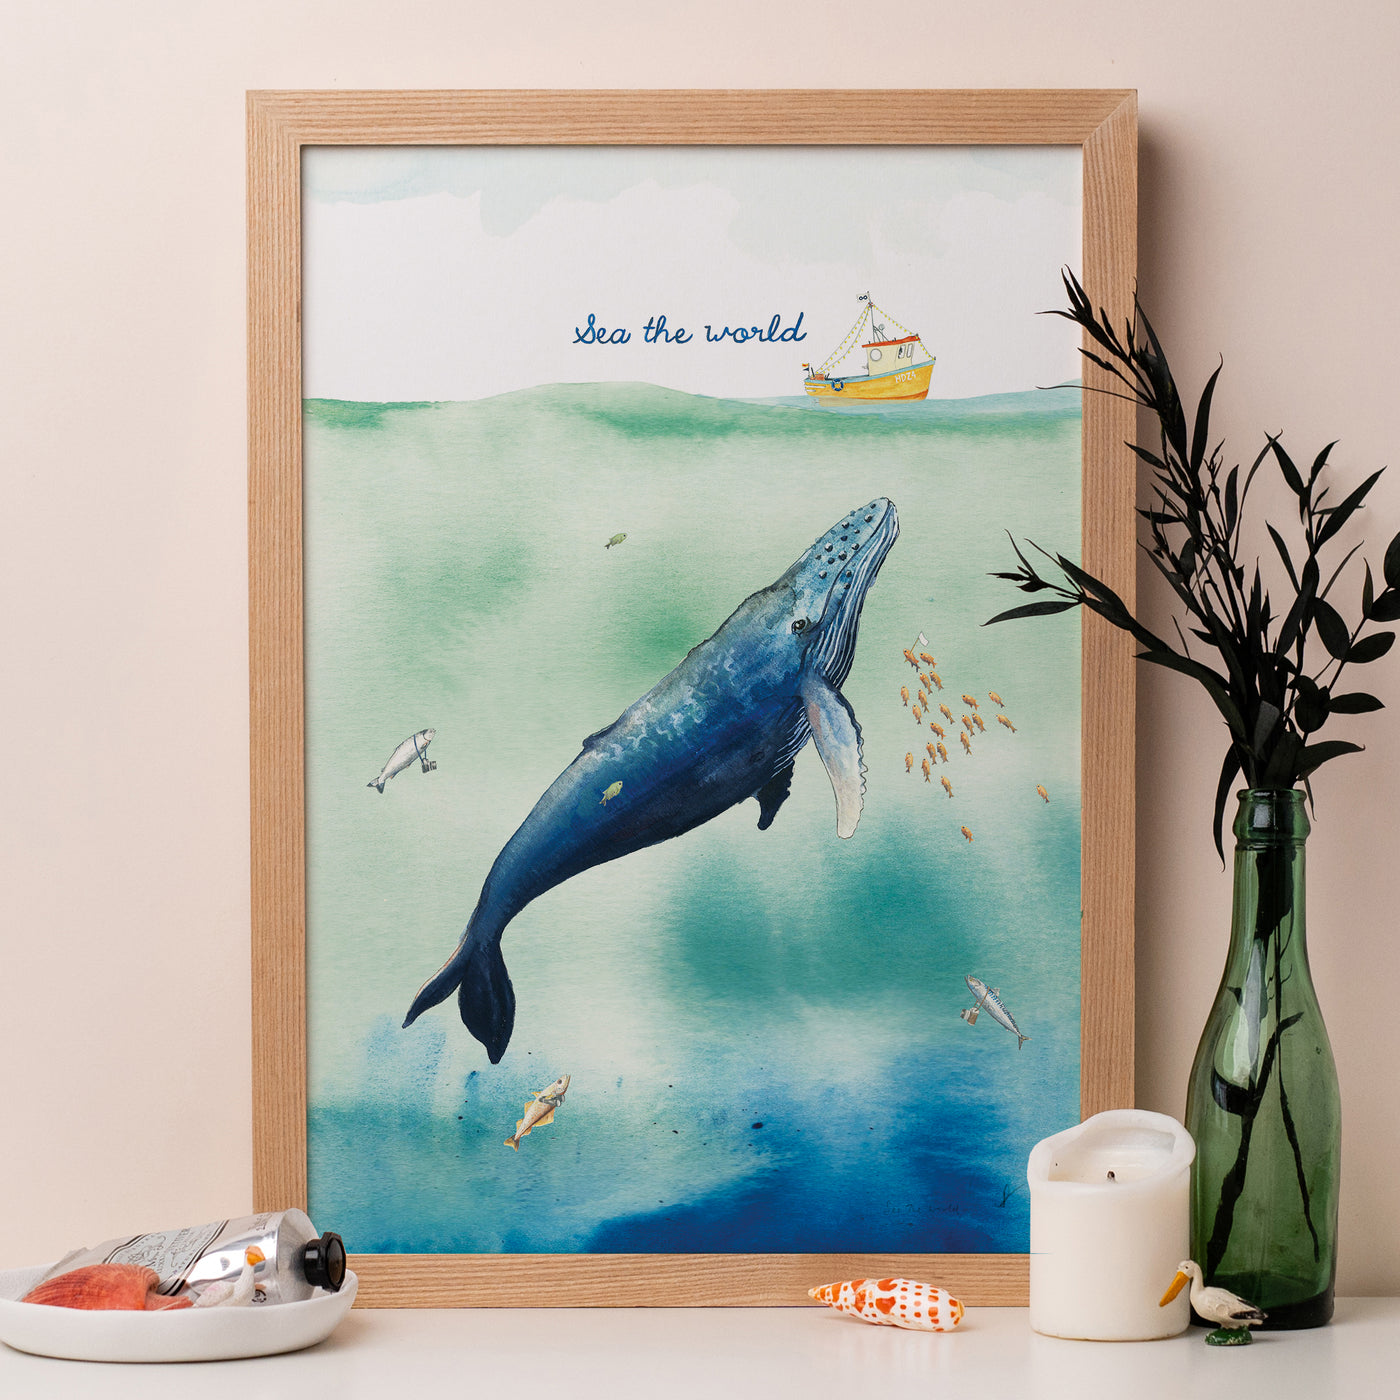 Framed illustration of a blue whale swimming in a green and blue sea